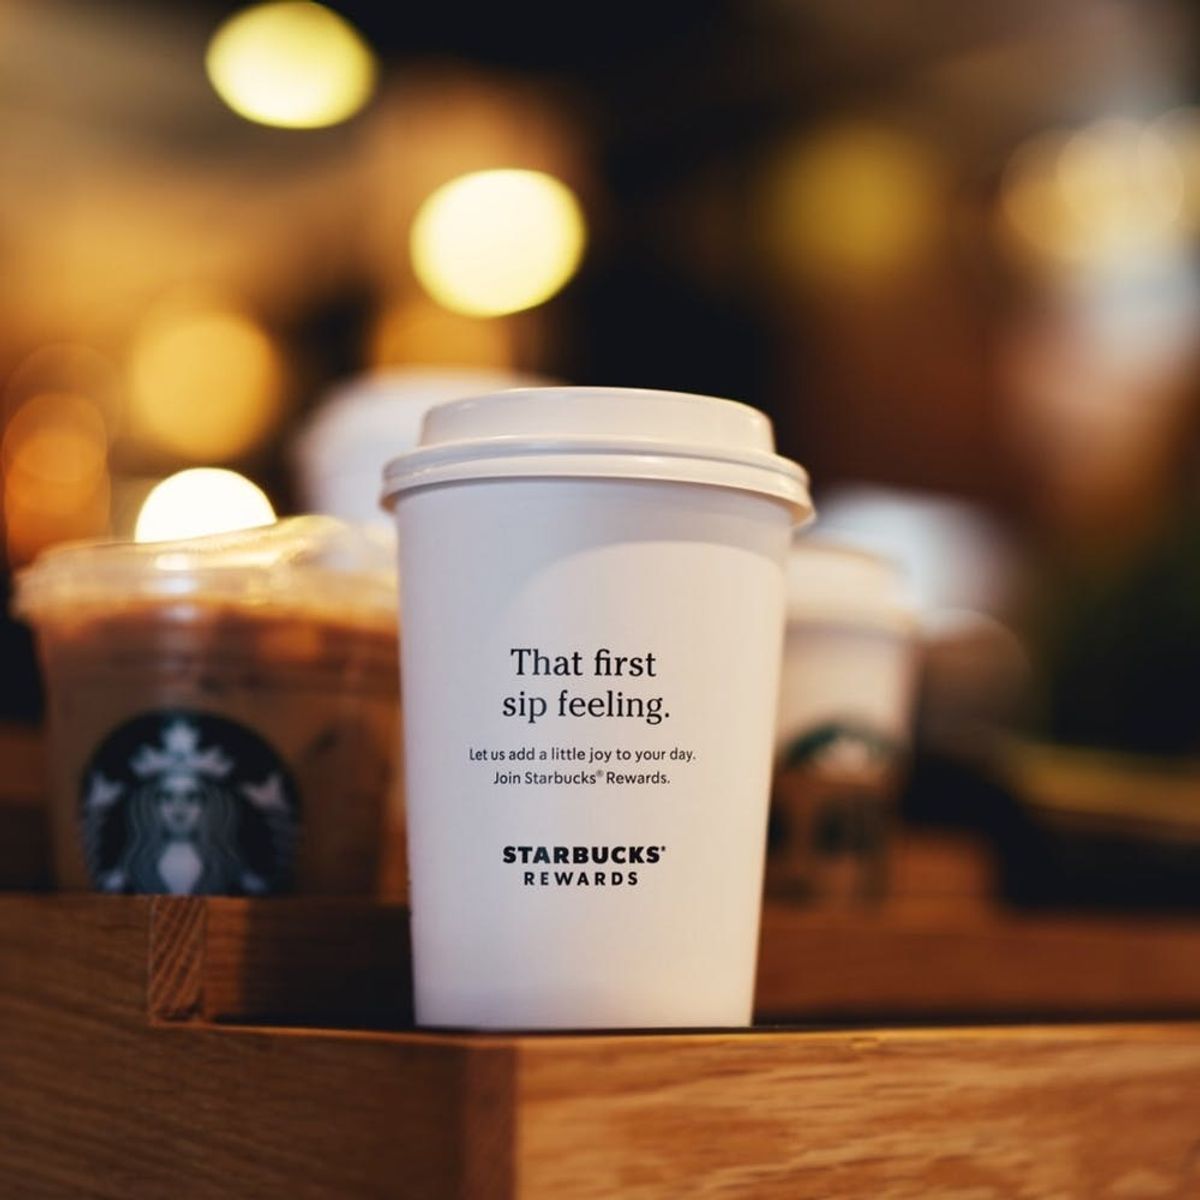 Starbucks Just Revamped Its Rewards Program to Give You So Much More